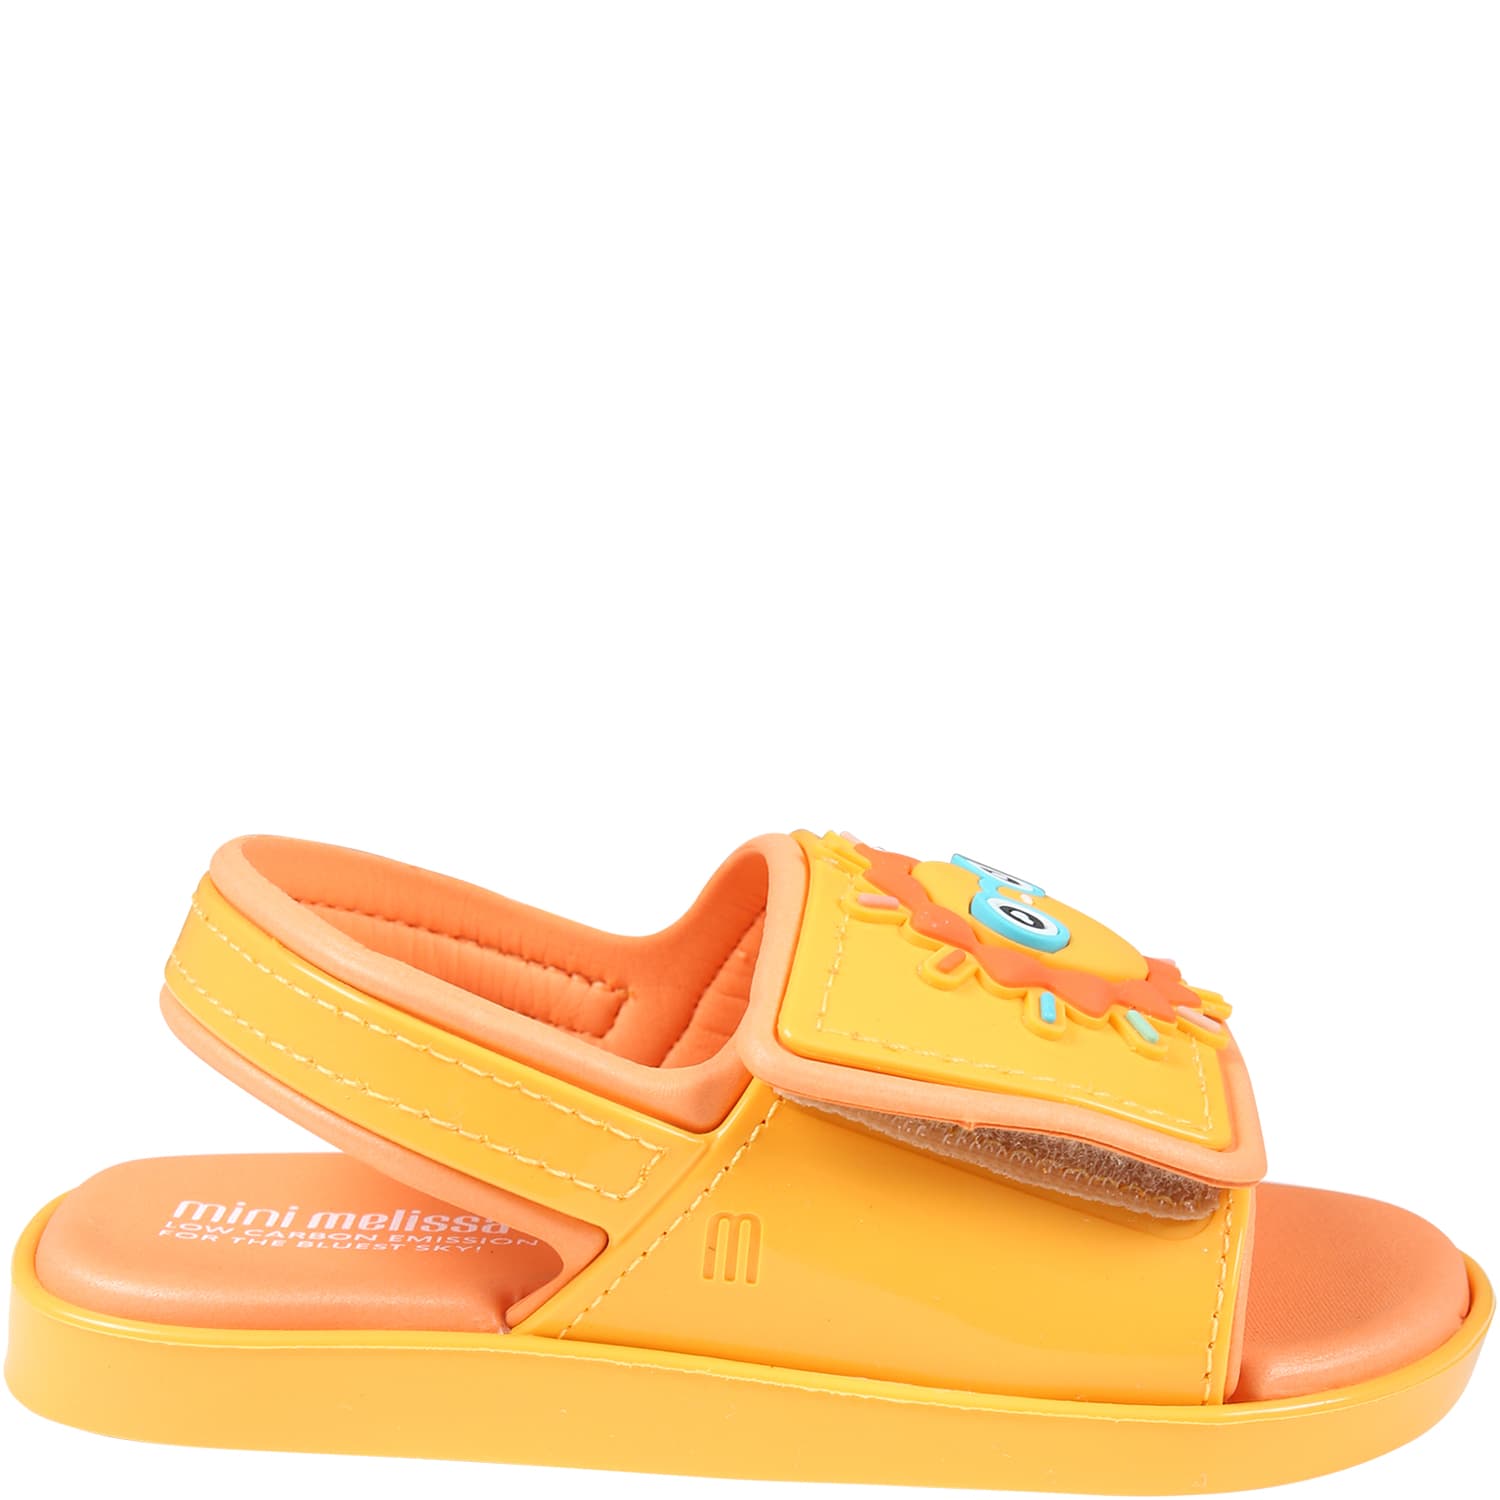 Melissa Orange Sandals For Kids With Sun And Cloud